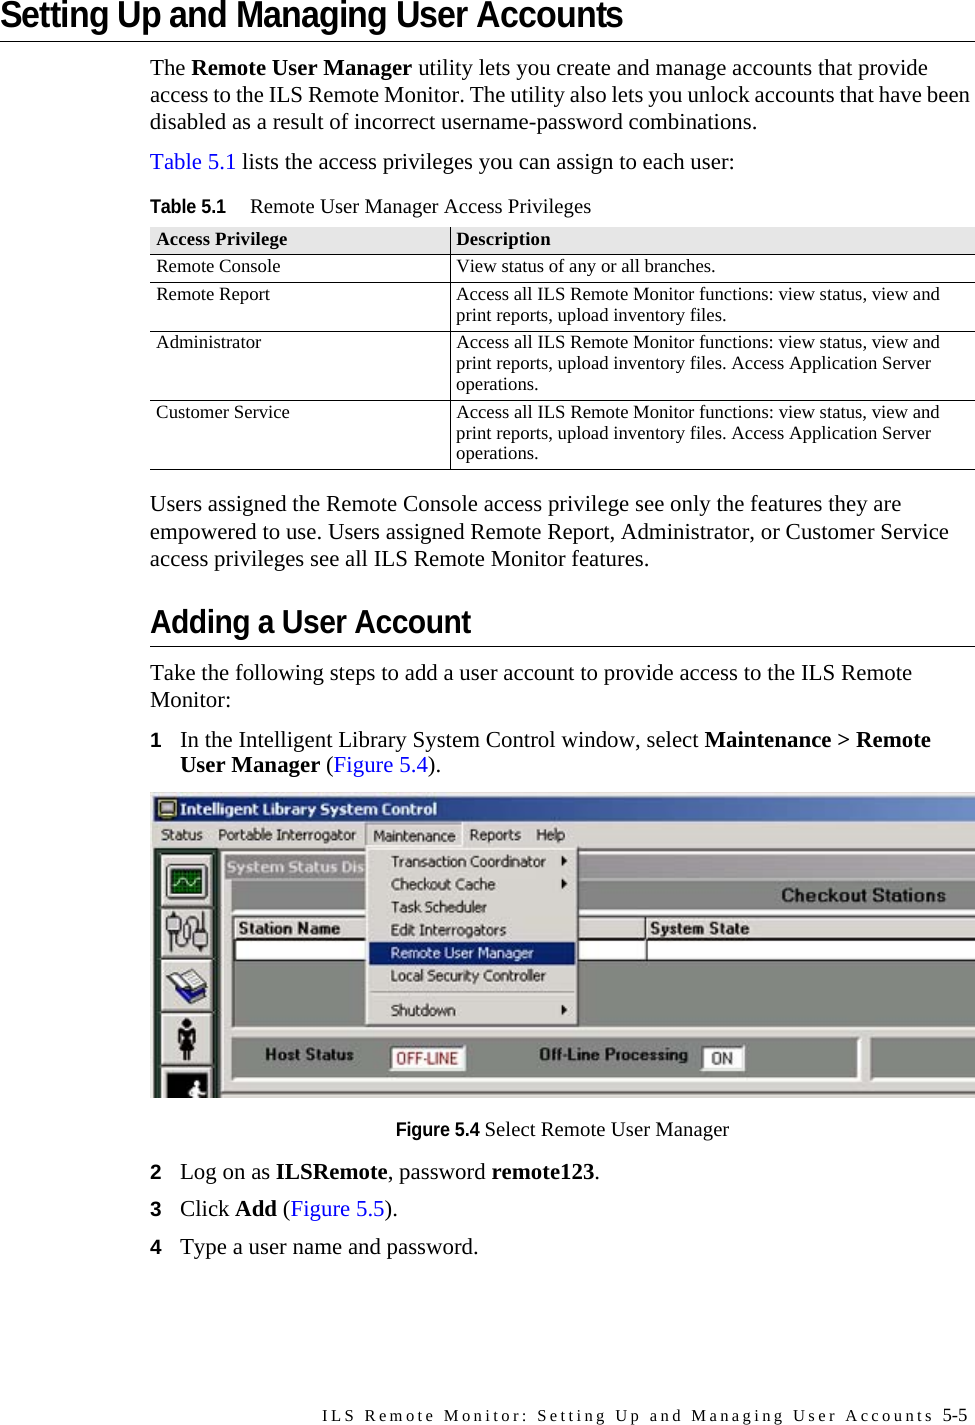 ILS Remote Monitor: Setting Up and Managing User Accounts 5-5Setting Up and Managing User AccountsThe Remote User Manager utility lets you create and manage accounts that provide access to the ILS Remote Monitor. The utility also lets you unlock accounts that have been disabled as a result of incorrect username-password combinations.Table 5.1 lists the access privileges you can assign to each user:Users assigned the Remote Console access privilege see only the features they are empowered to use. Users assigned Remote Report, Administrator, or Customer Service access privileges see all ILS Remote Monitor features. Adding a User AccountTake the following steps to add a user account to provide access to the ILS Remote Monitor:1In the Intelligent Library System Control window, select Maintenance &gt; Remote User Manager (Figure 5.4). Figure 5.4 Select Remote User Manager2Log on as ILSRemote, password remote123. 3Click Add (Figure 5.5).4Type a user name and password.Table 5.1Remote User Manager Access PrivilegesAccess Privilege DescriptionRemote Console View status of any or all branches.Remote Report Access all ILS Remote Monitor functions: view status, view and print reports, upload inventory files.Administrator Access all ILS Remote Monitor functions: view status, view and print reports, upload inventory files. Access Application Server operations. Customer Service Access all ILS Remote Monitor functions: view status, view and print reports, upload inventory files. Access Application Server operations. 